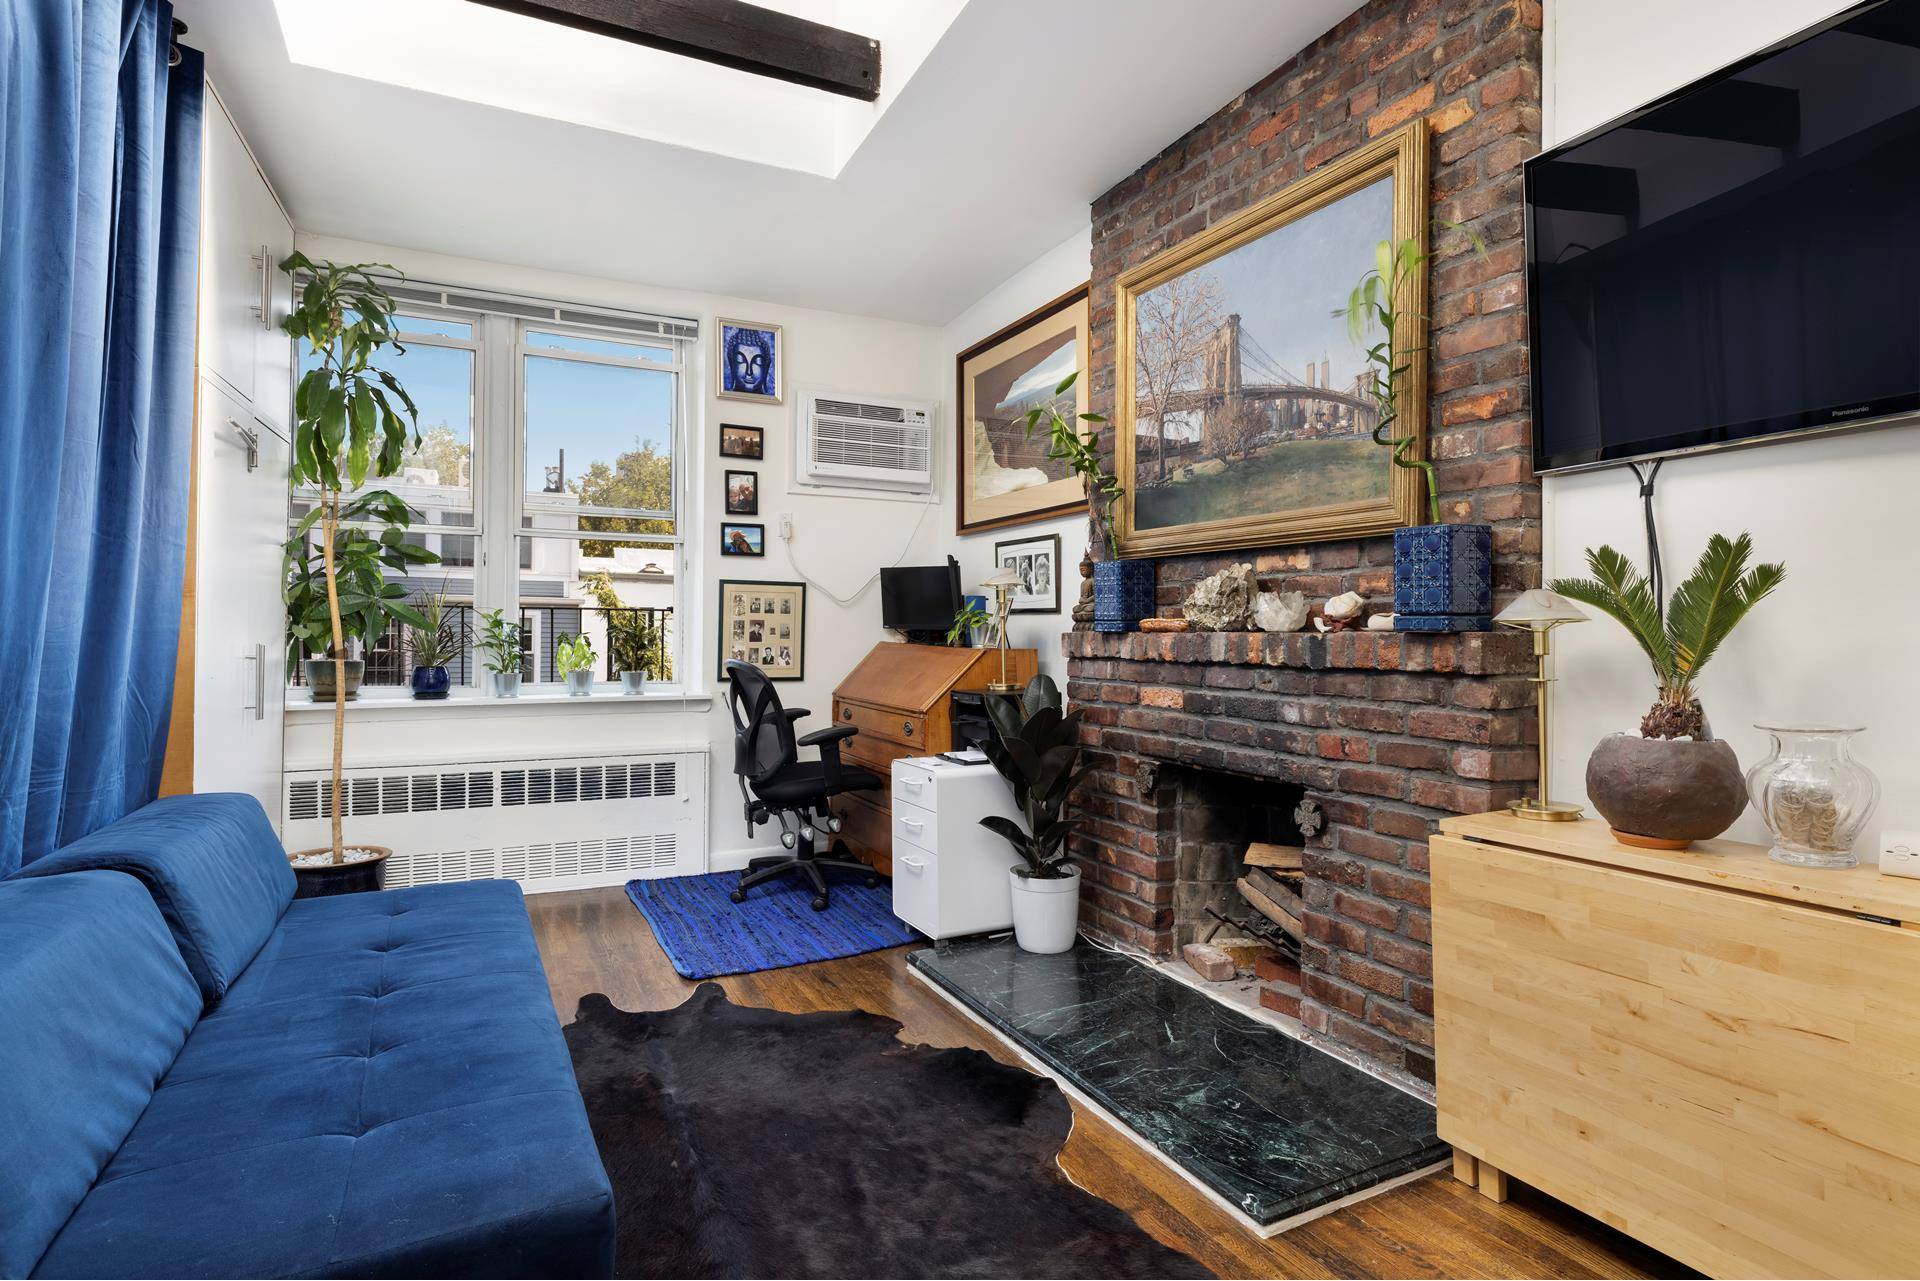 A Renovated Gem on one of Cobble Hill's most sought after blocks.